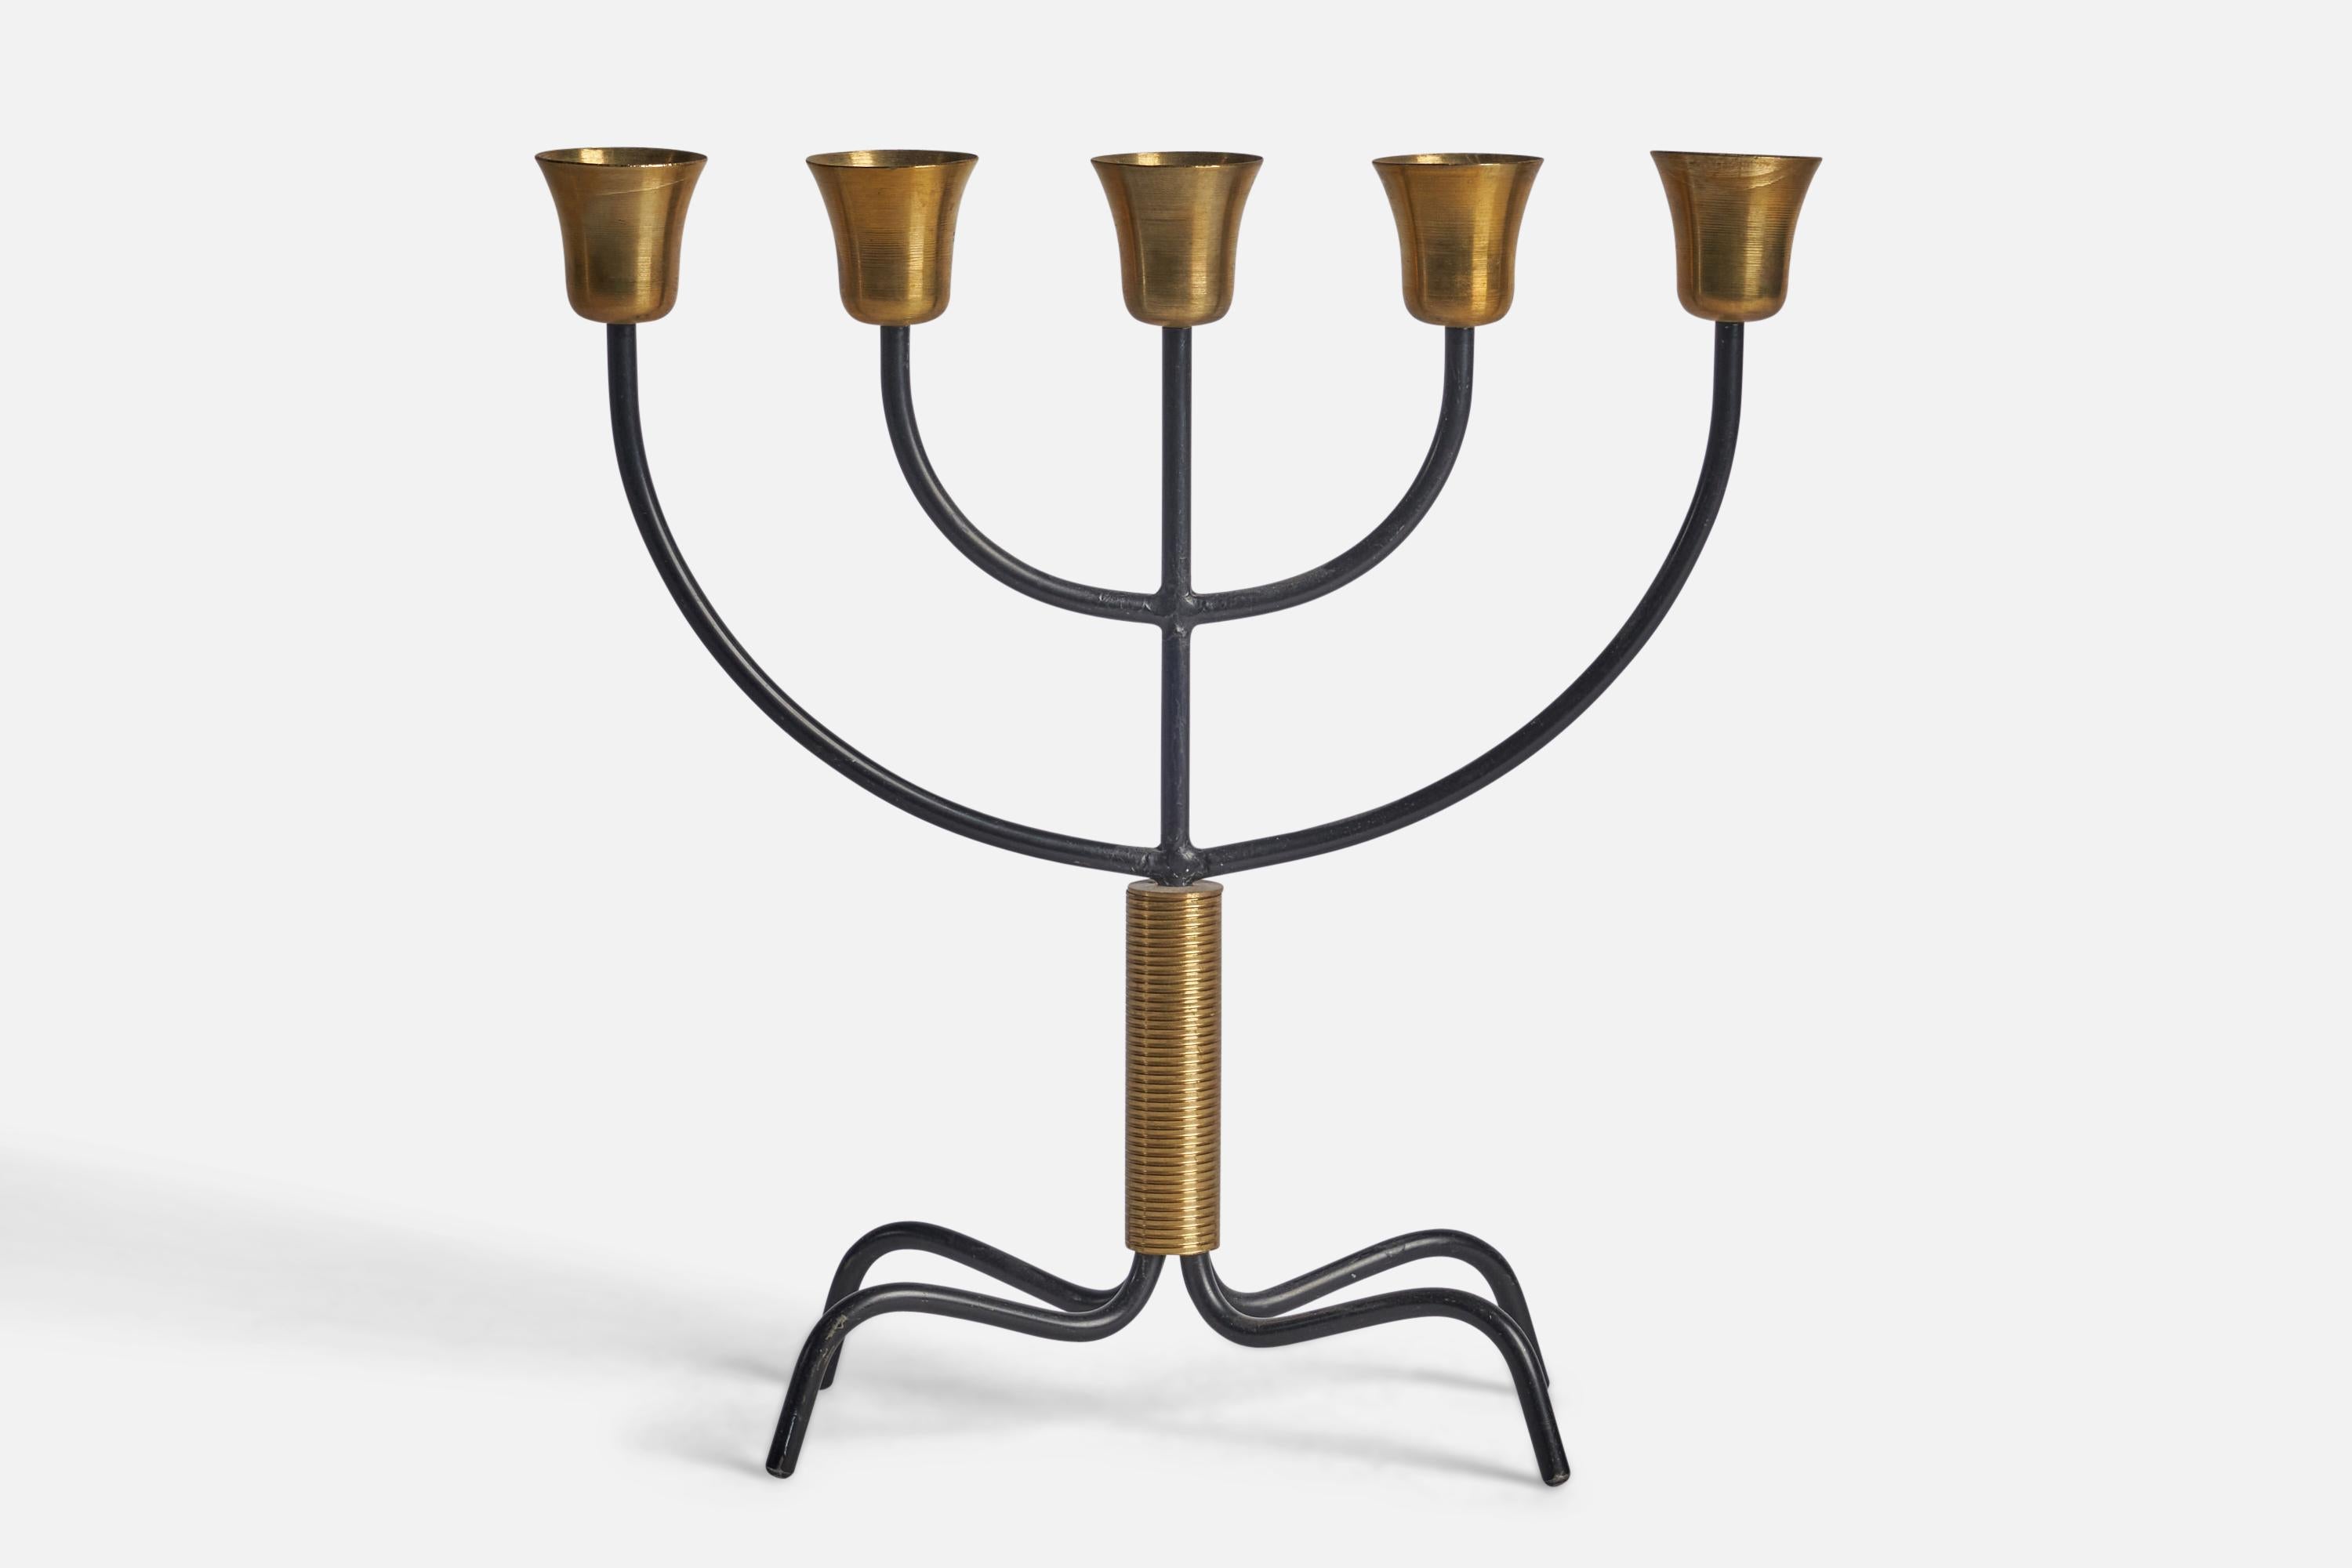 A brass and black-lacquered metal candelabra designed and produced by Svend Aage Holm Sørensen, Denmark, 1960s.

Fits 0.9” diameter candles